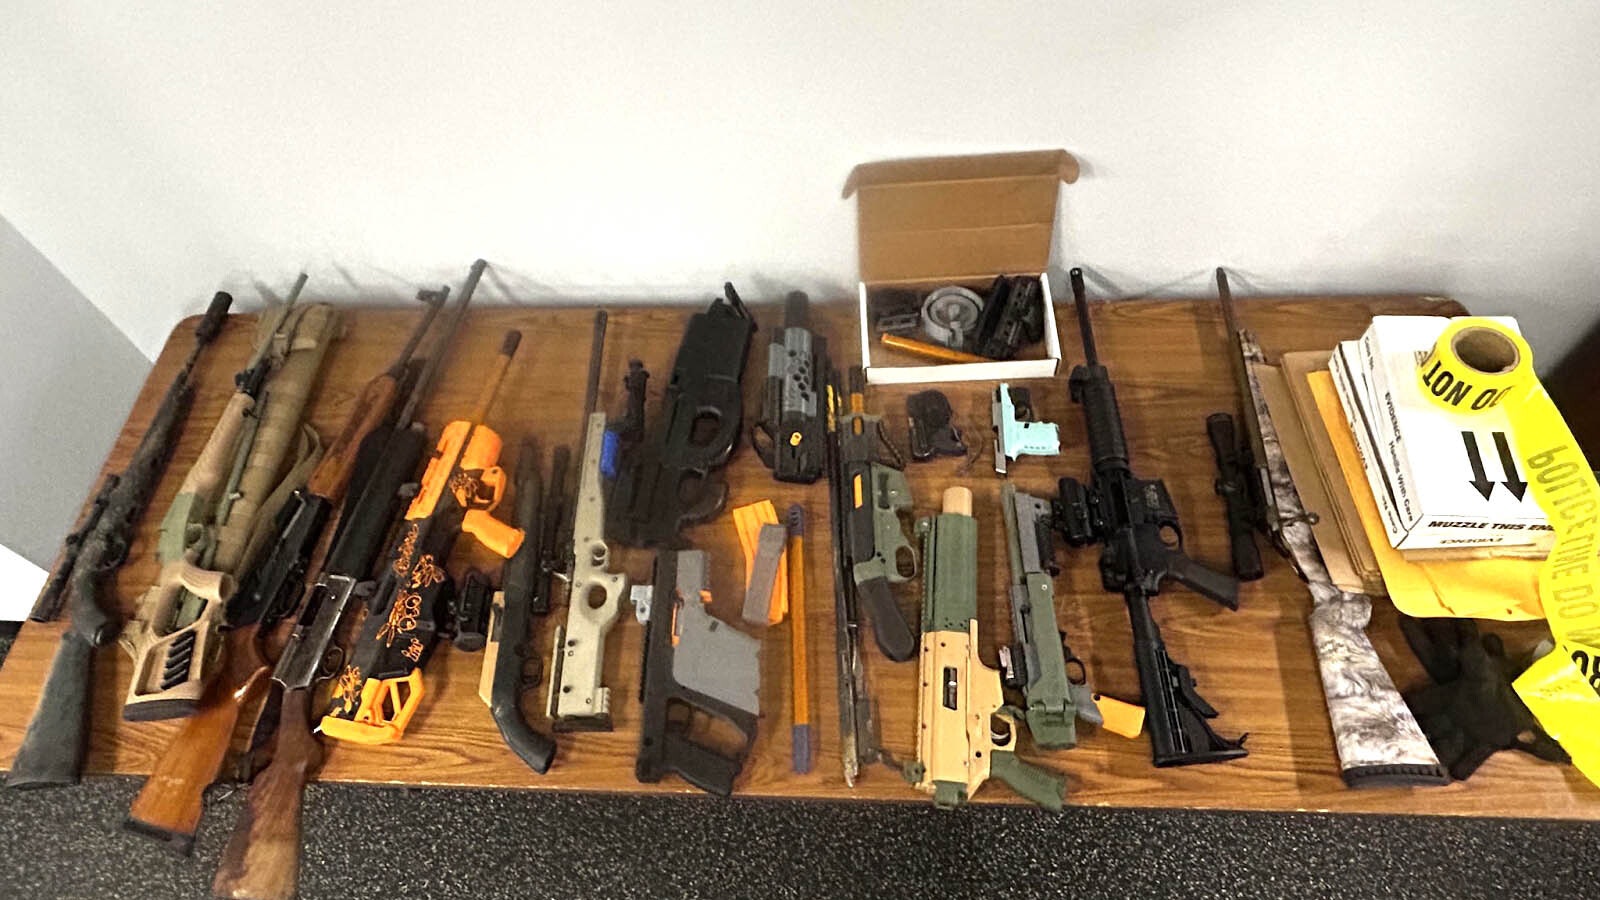 An array of store-bought and 3D-printed firearms and parts seized by the Sheridan Police Department.